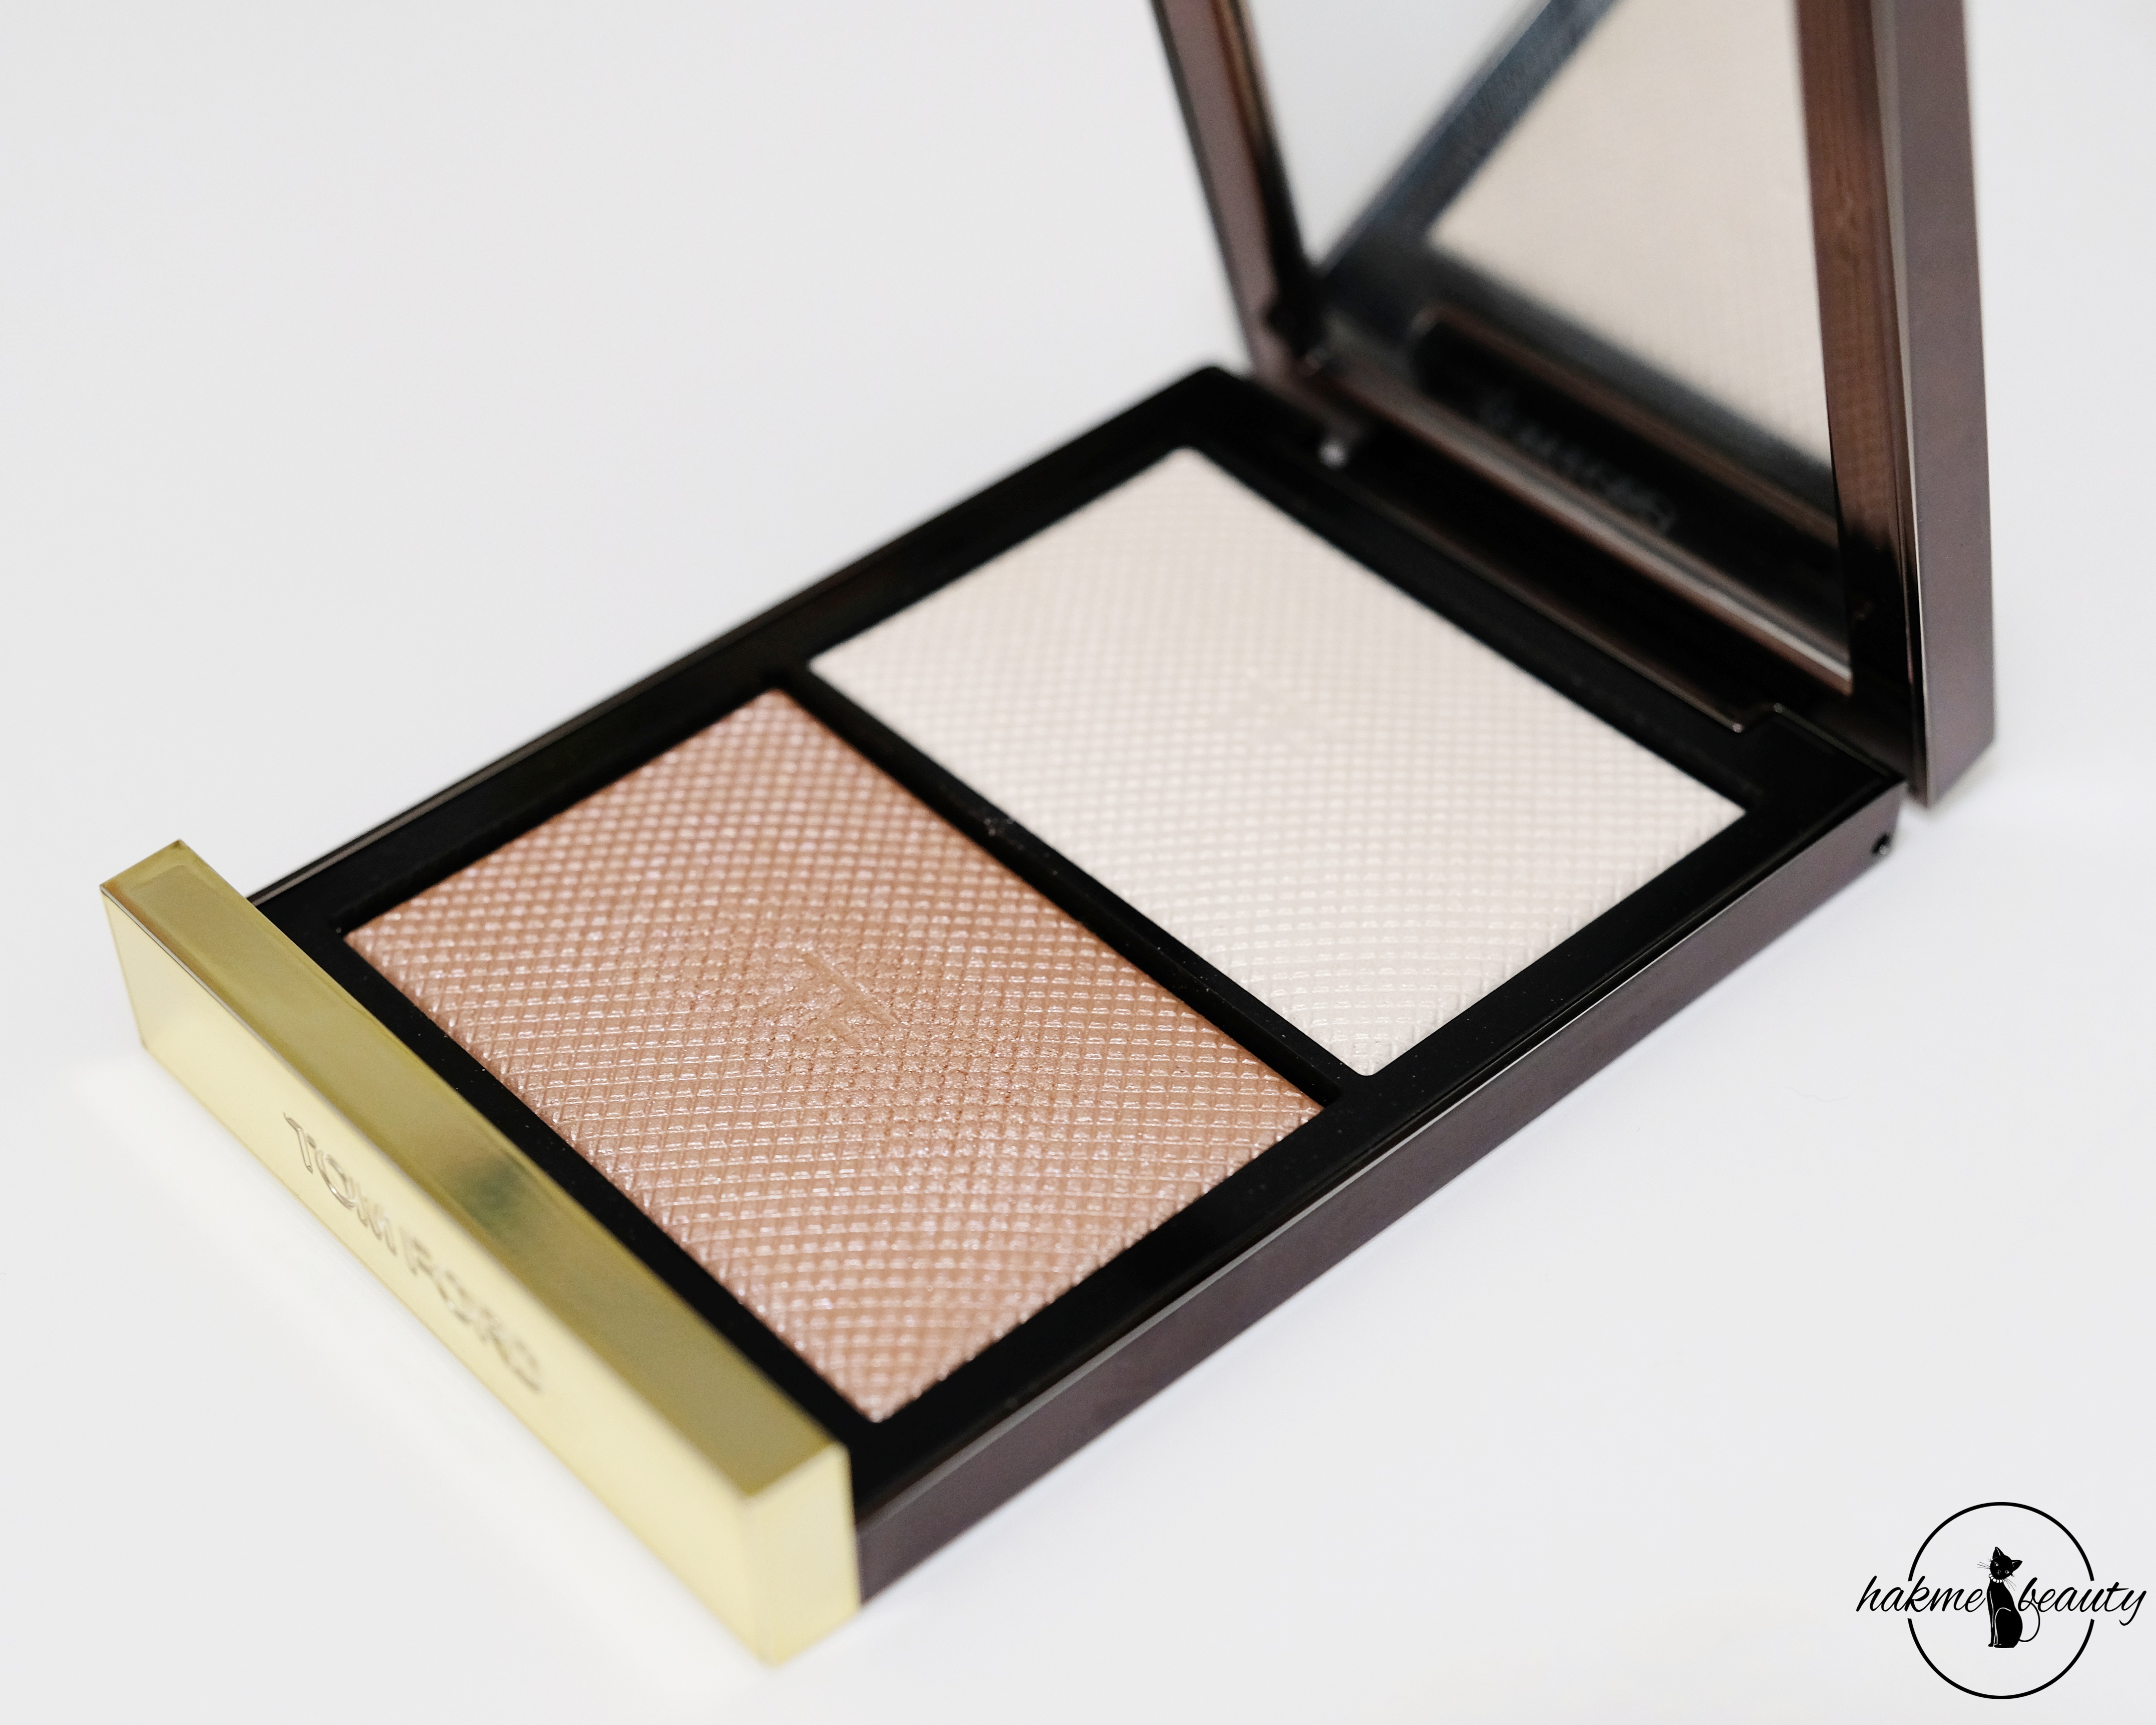 Tom Ford Skin Illuminating Powder Duo in 01 Moonlight Review - Hakme Beauty